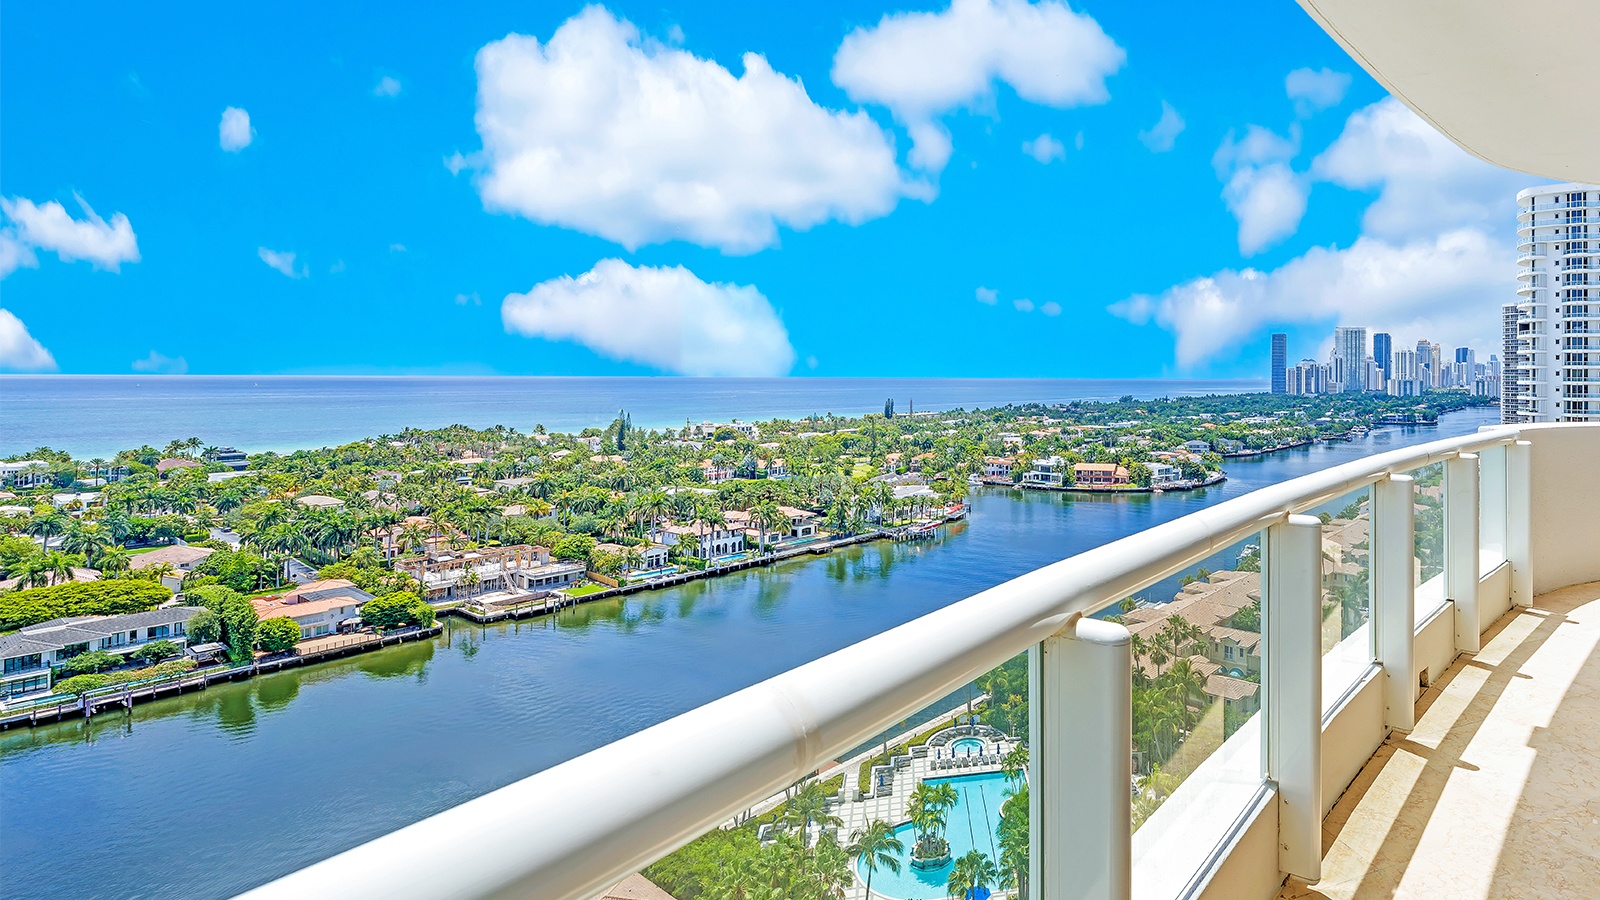 Aventura Real Estate: Why It’s the Ideal Destination for Your Dream Home